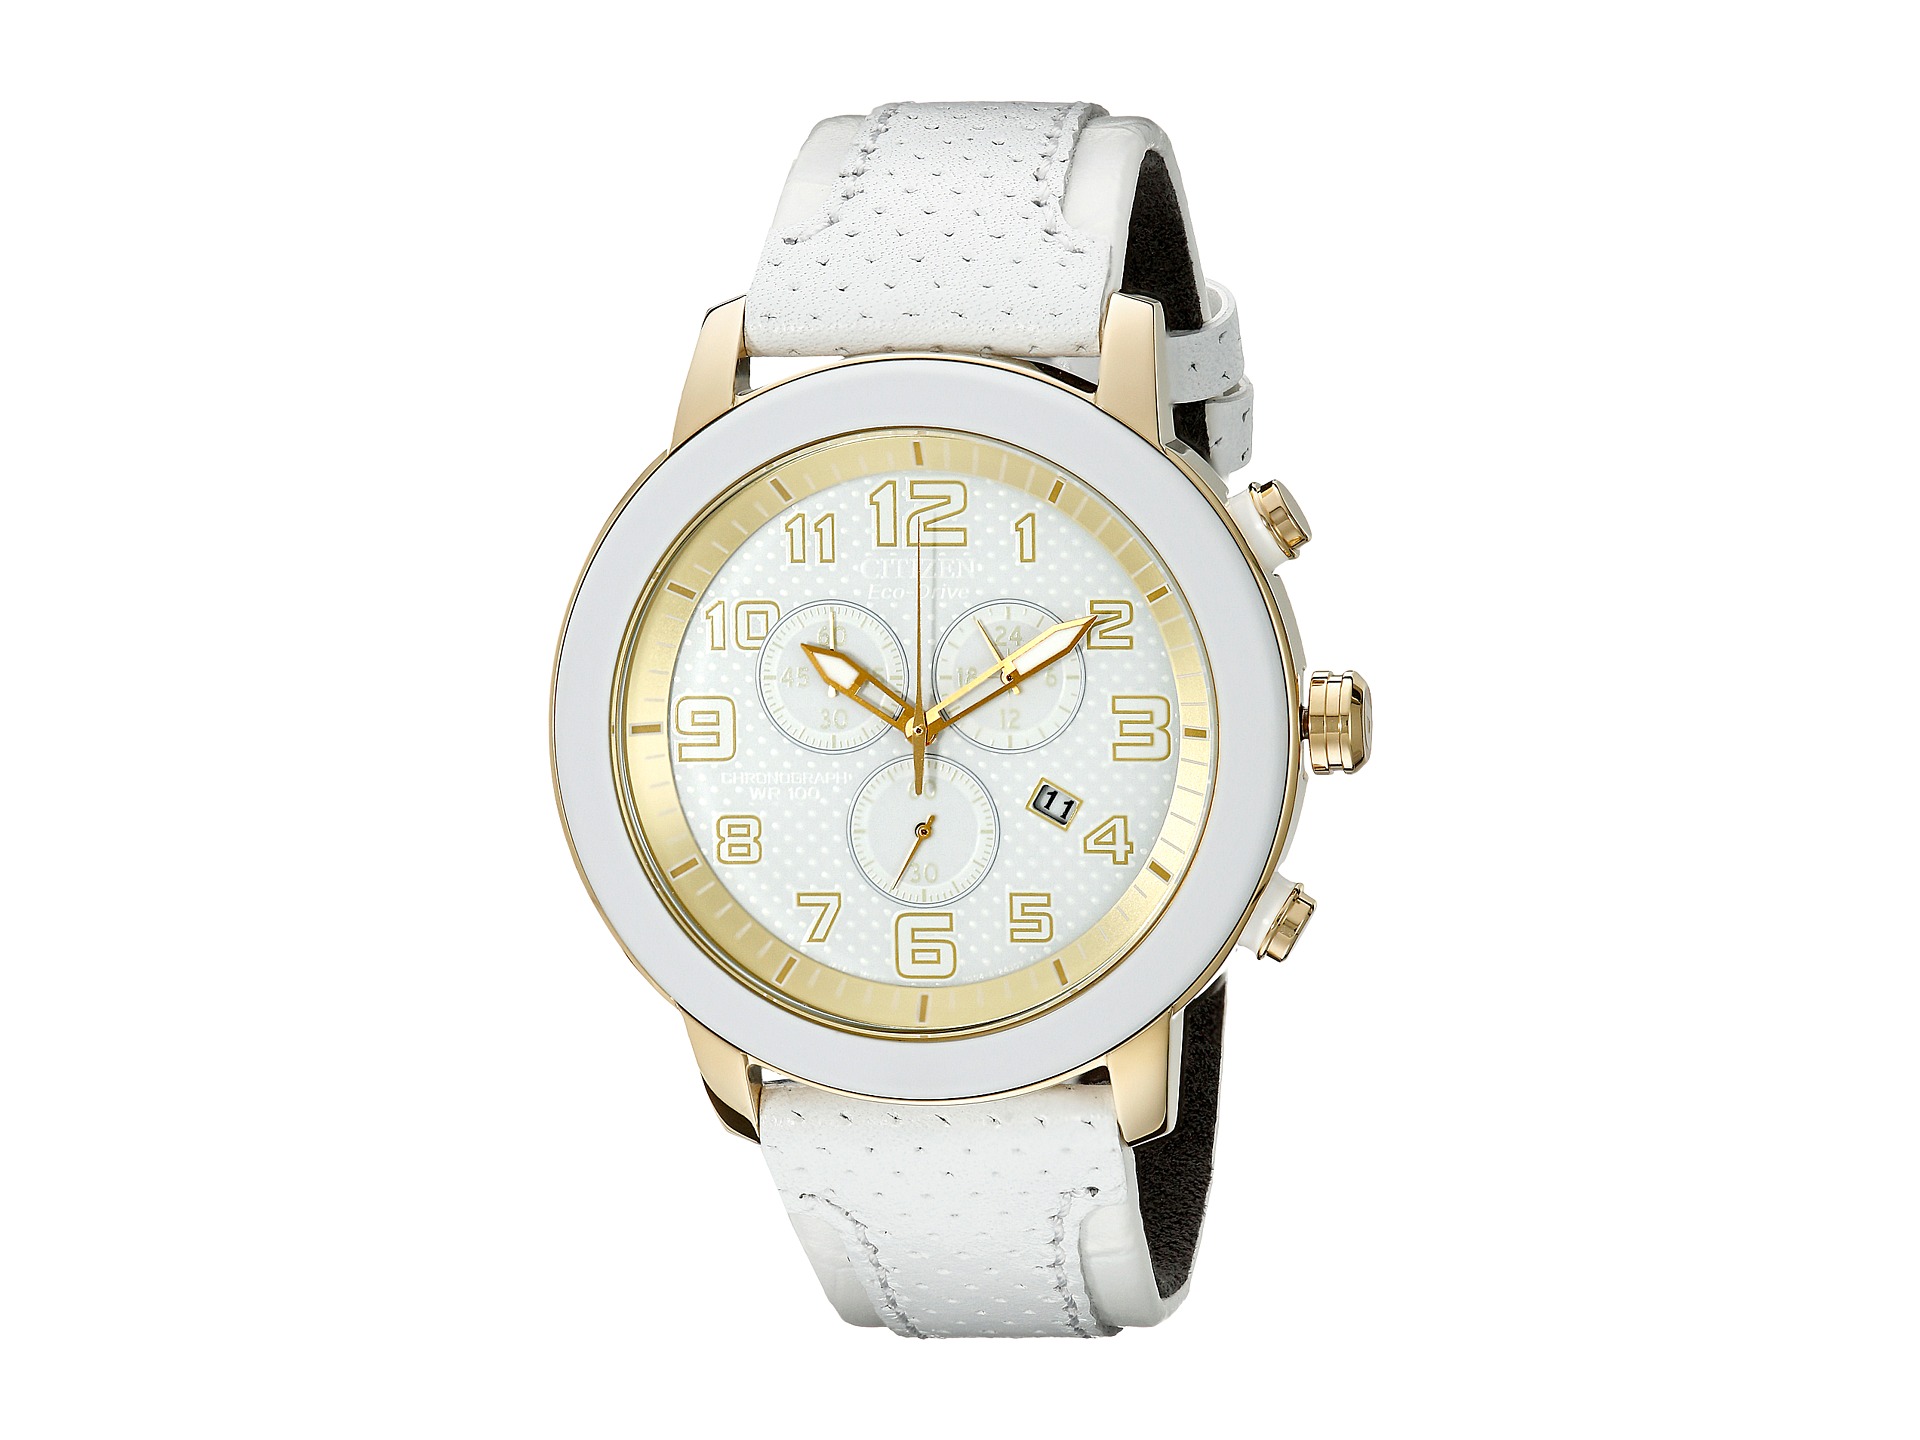 Citizen Watches AT2232 08A Drive from Citizen Eco Drive BRT 3.0 Chronograph Watch Gold Tone Stainless Steel